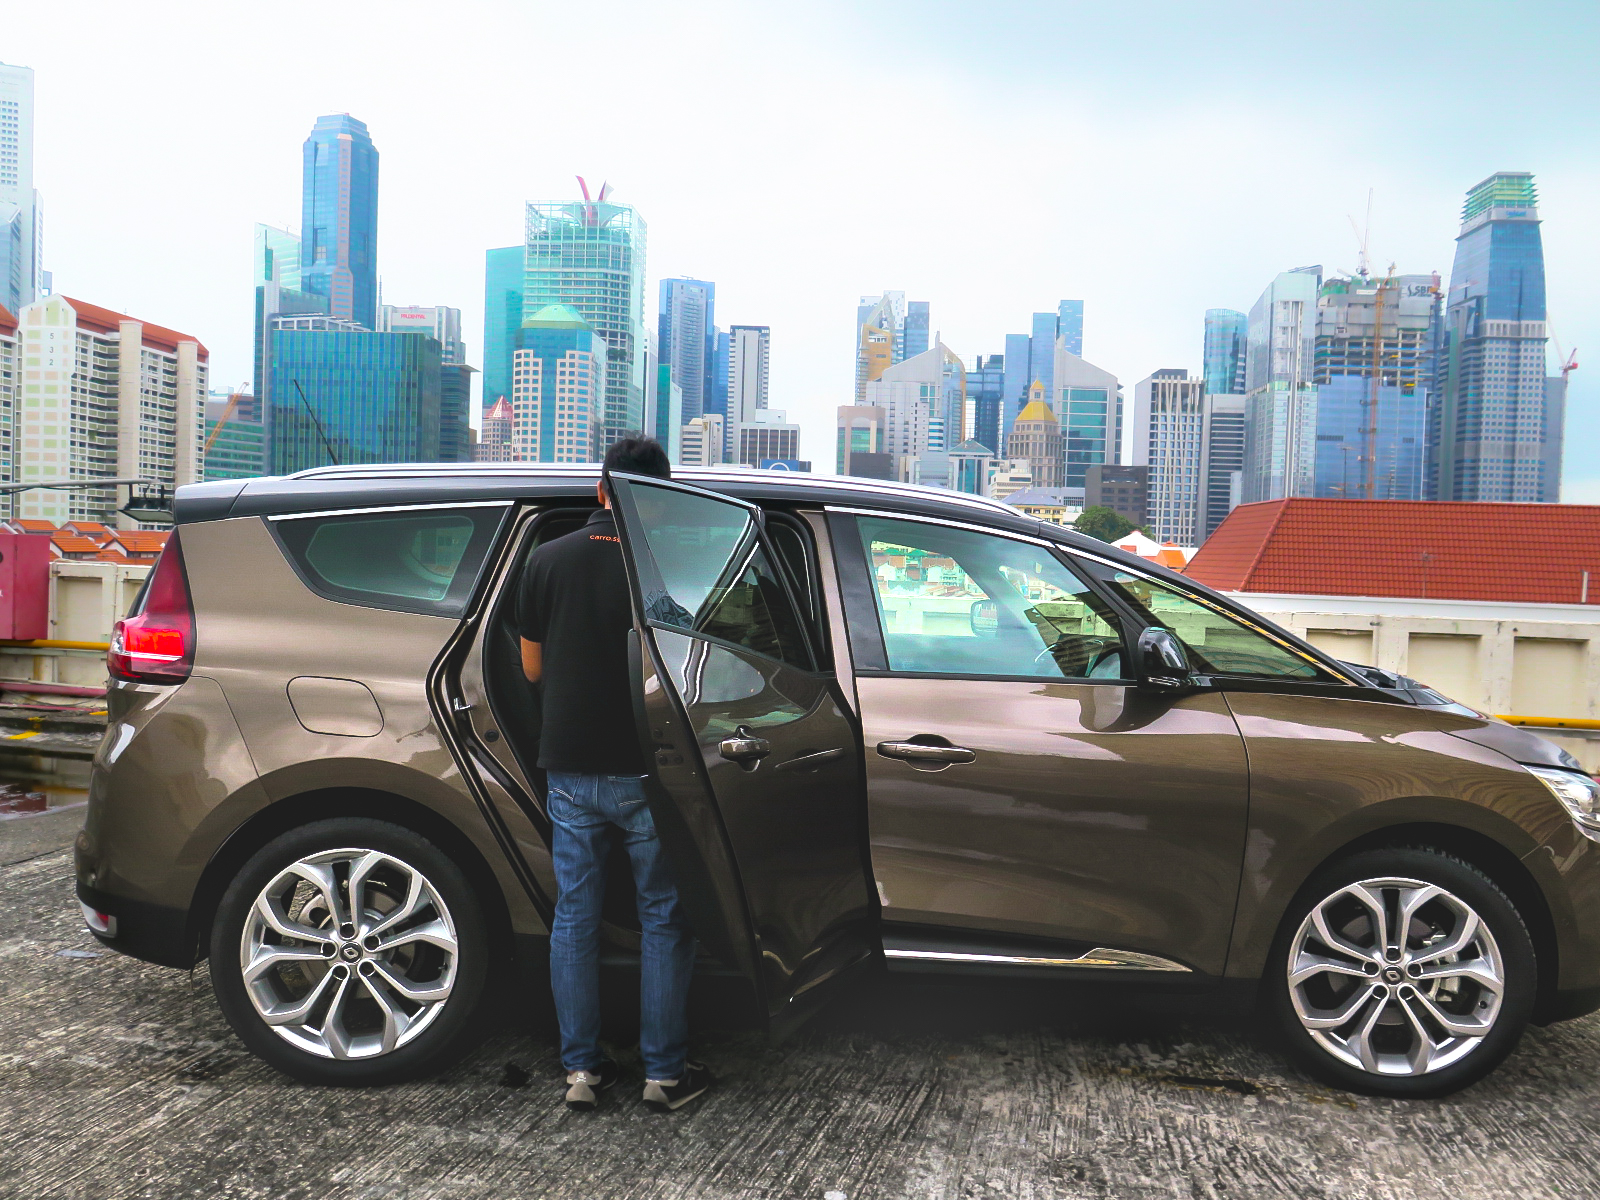 [First Drive with Carro] Renault Grand Scenic: A Grand Ride for the Family